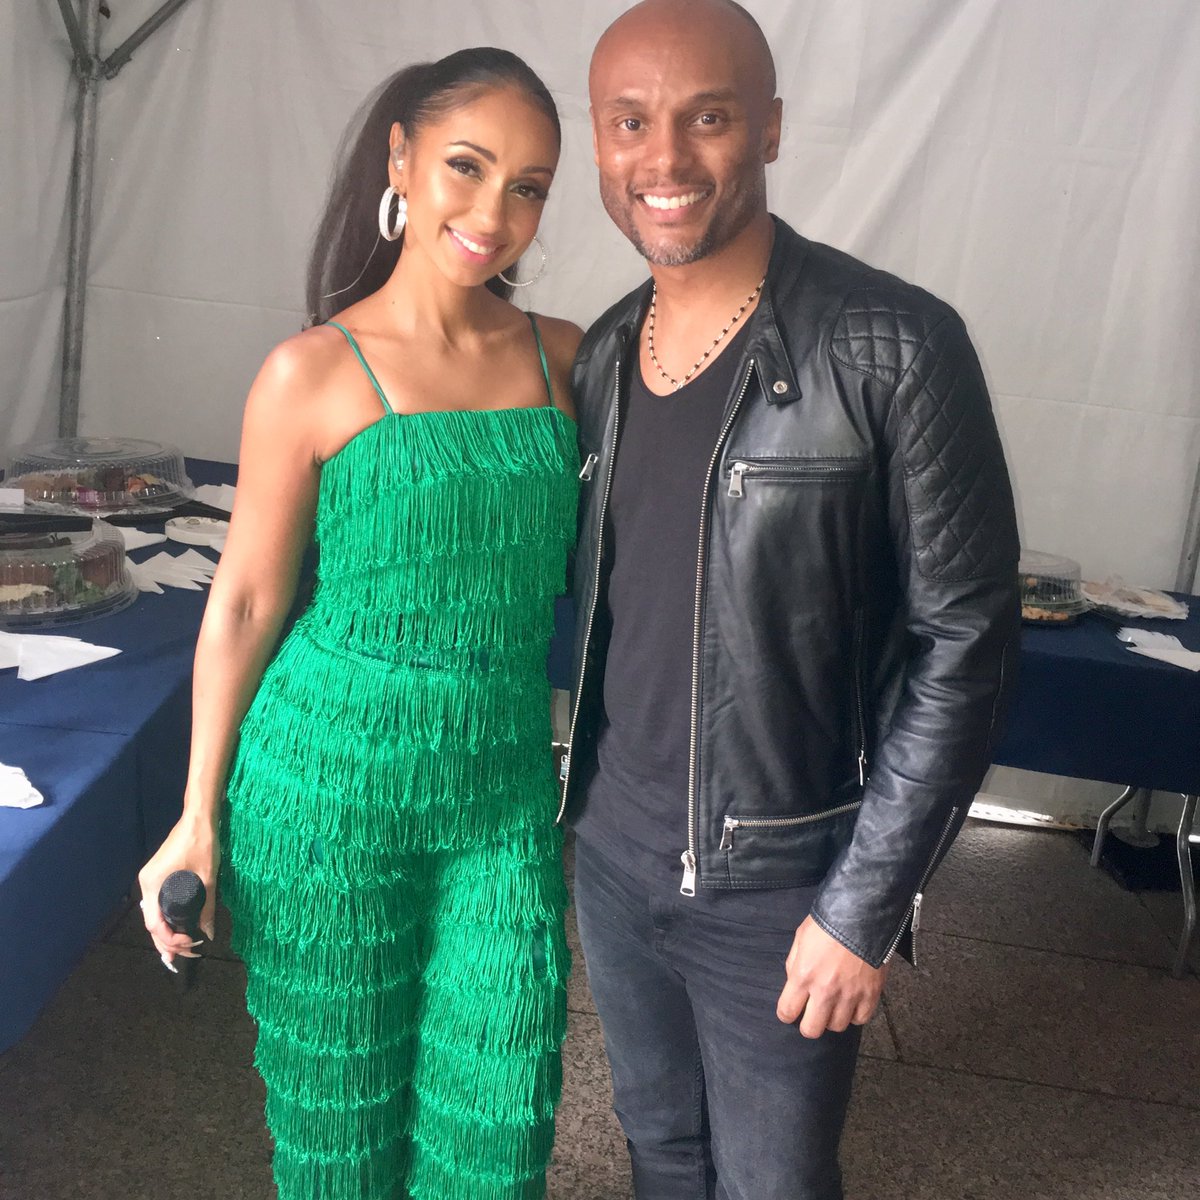 I had a great time w/ my family & friends at #DCEmancipationDay! Thank you to everyone responsible for organizing the festivities and to everyone in the #DMV who celebrated with us!! Good things happen when good people come together. Thanks for the photo @MYAPLANET9! #EntertainDC